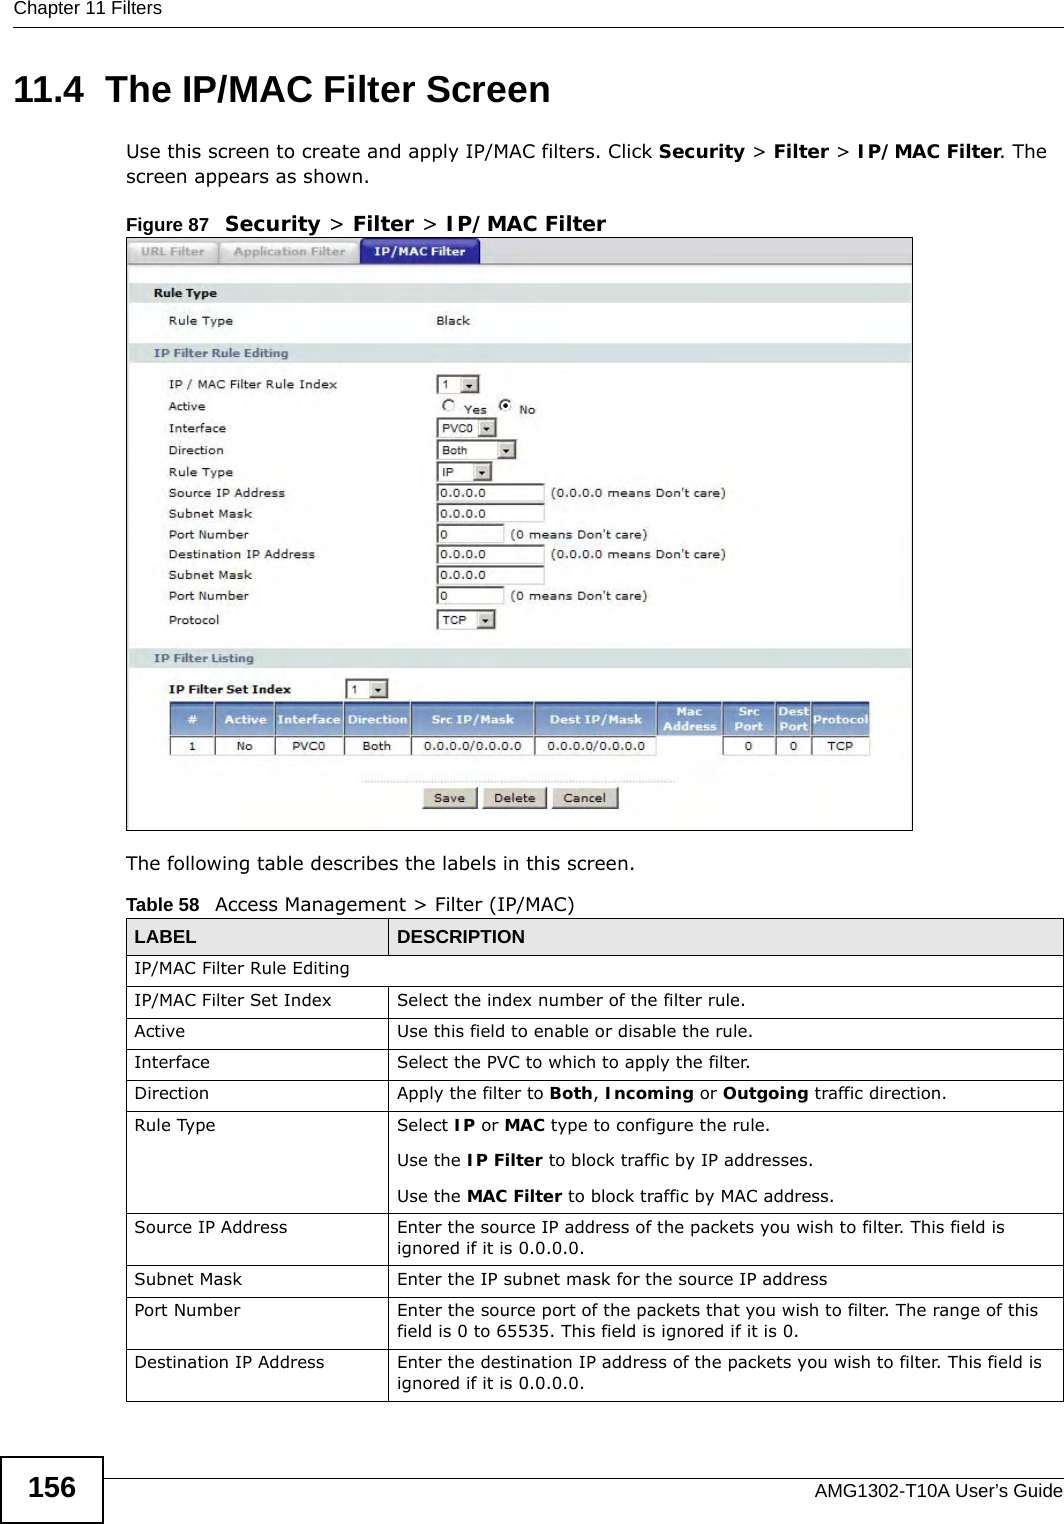 Chapter 11 FiltersAMG1302-T10A User’s Guide15611.4  The IP/MAC Filter ScreenUse this screen to create and apply IP/MAC filters. Click Security &gt; Filter &gt; IP/MAC Filter. The screen appears as shown.Figure 87   Security &gt; Filter &gt; IP/MAC FilterThe following table describes the labels in this screen. Table 58   Access Management &gt; Filter (IP/MAC)LABEL DESCRIPTIONIP/MAC Filter Rule EditingIP/MAC Filter Set Index Select the index number of the filter rule.Active Use this field to enable or disable the rule.Interface Select the PVC to which to apply the filter.Direction Apply the filter to Both, Incoming or Outgoing traffic direction.Rule Type Select IP or MAC type to configure the rule.Use the IP Filter to block traffic by IP addresses.Use the MAC Filter to block traffic by MAC address.Source IP Address Enter the source IP address of the packets you wish to filter. This field is ignored if it is 0.0.0.0.Subnet Mask Enter the IP subnet mask for the source IP addressPort Number Enter the source port of the packets that you wish to filter. The range of this field is 0 to 65535. This field is ignored if it is 0.Destination IP Address Enter the destination IP address of the packets you wish to filter. This field is ignored if it is 0.0.0.0.